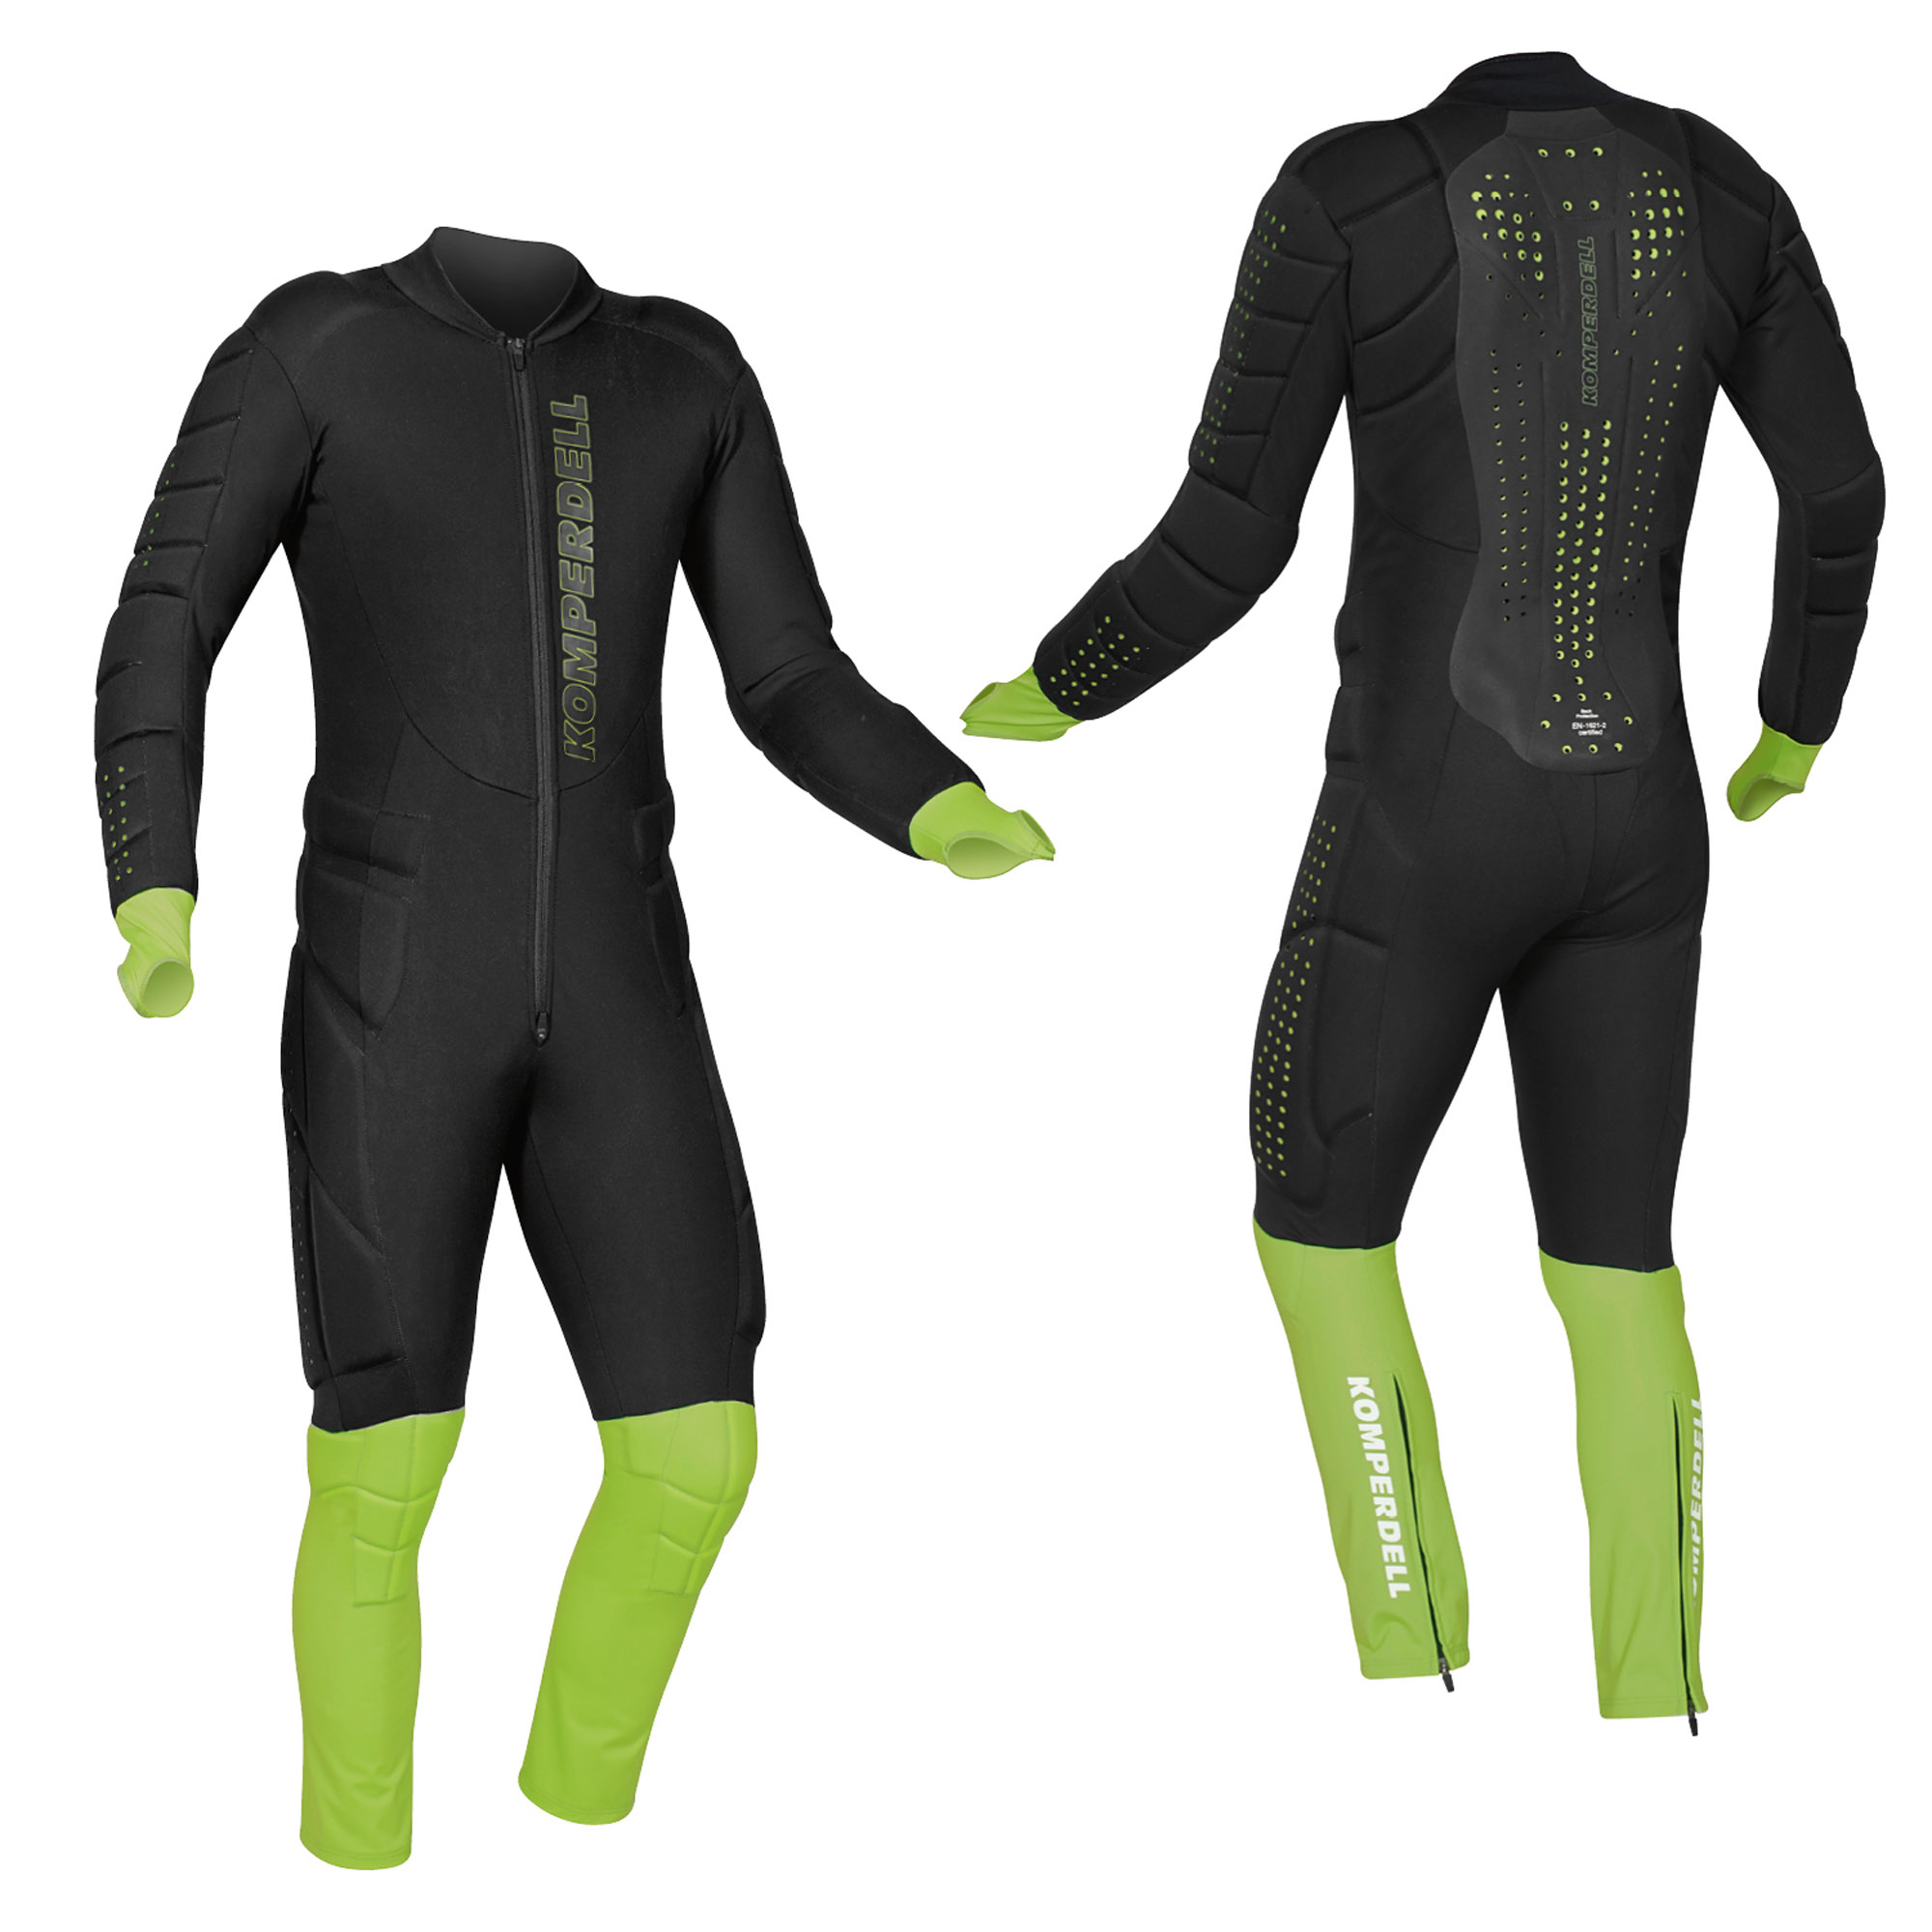 Full Protector Race Suit Adult